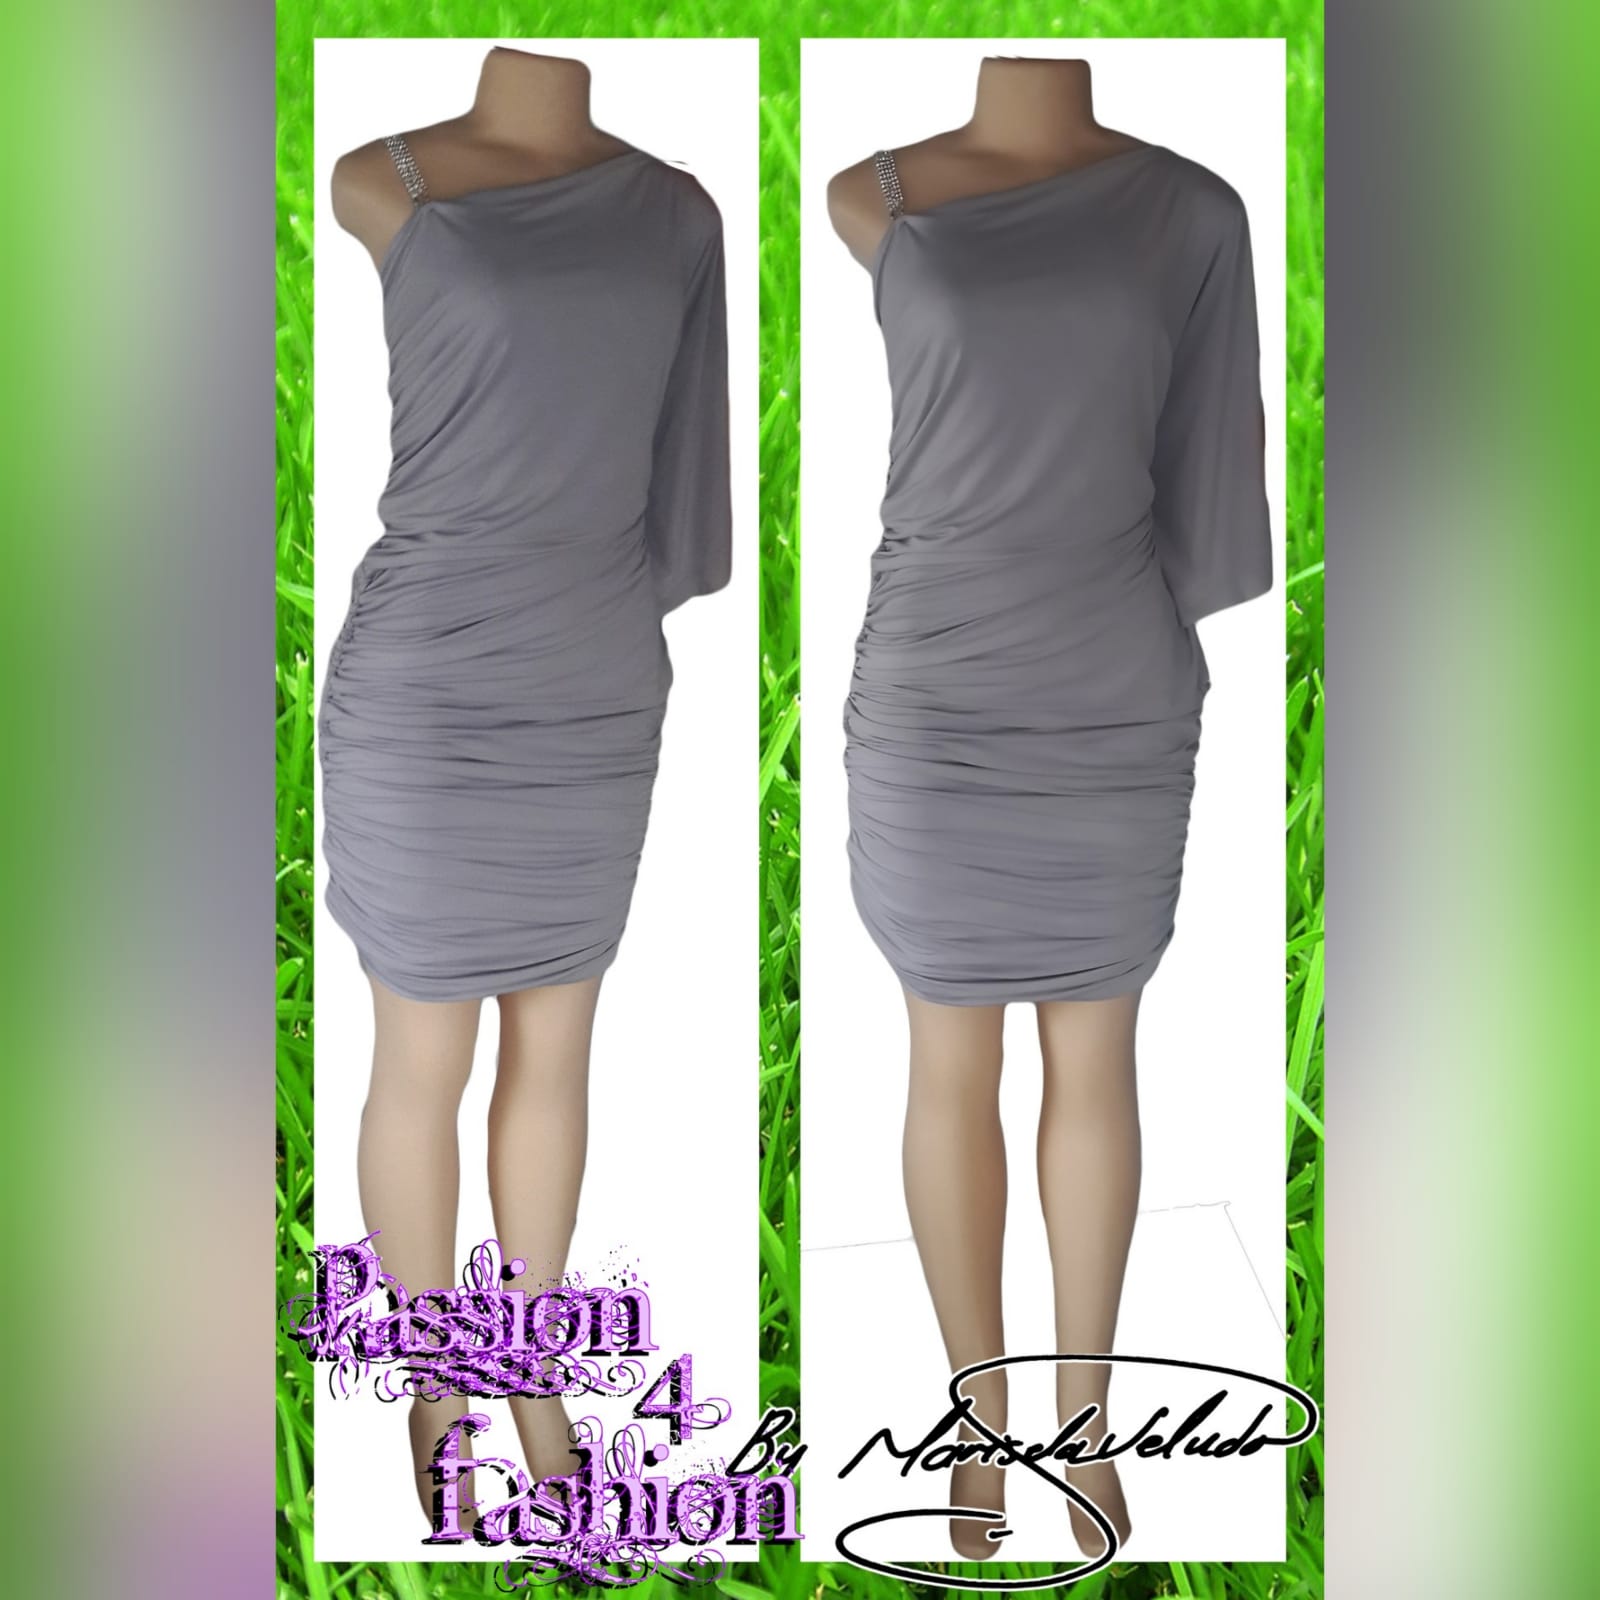 Light grey ruched knee length smart casual dress 2 light grey ruched knee length smart casual dress with one wide sleeve, an angular neckline and a removable diamante shoulder strap.